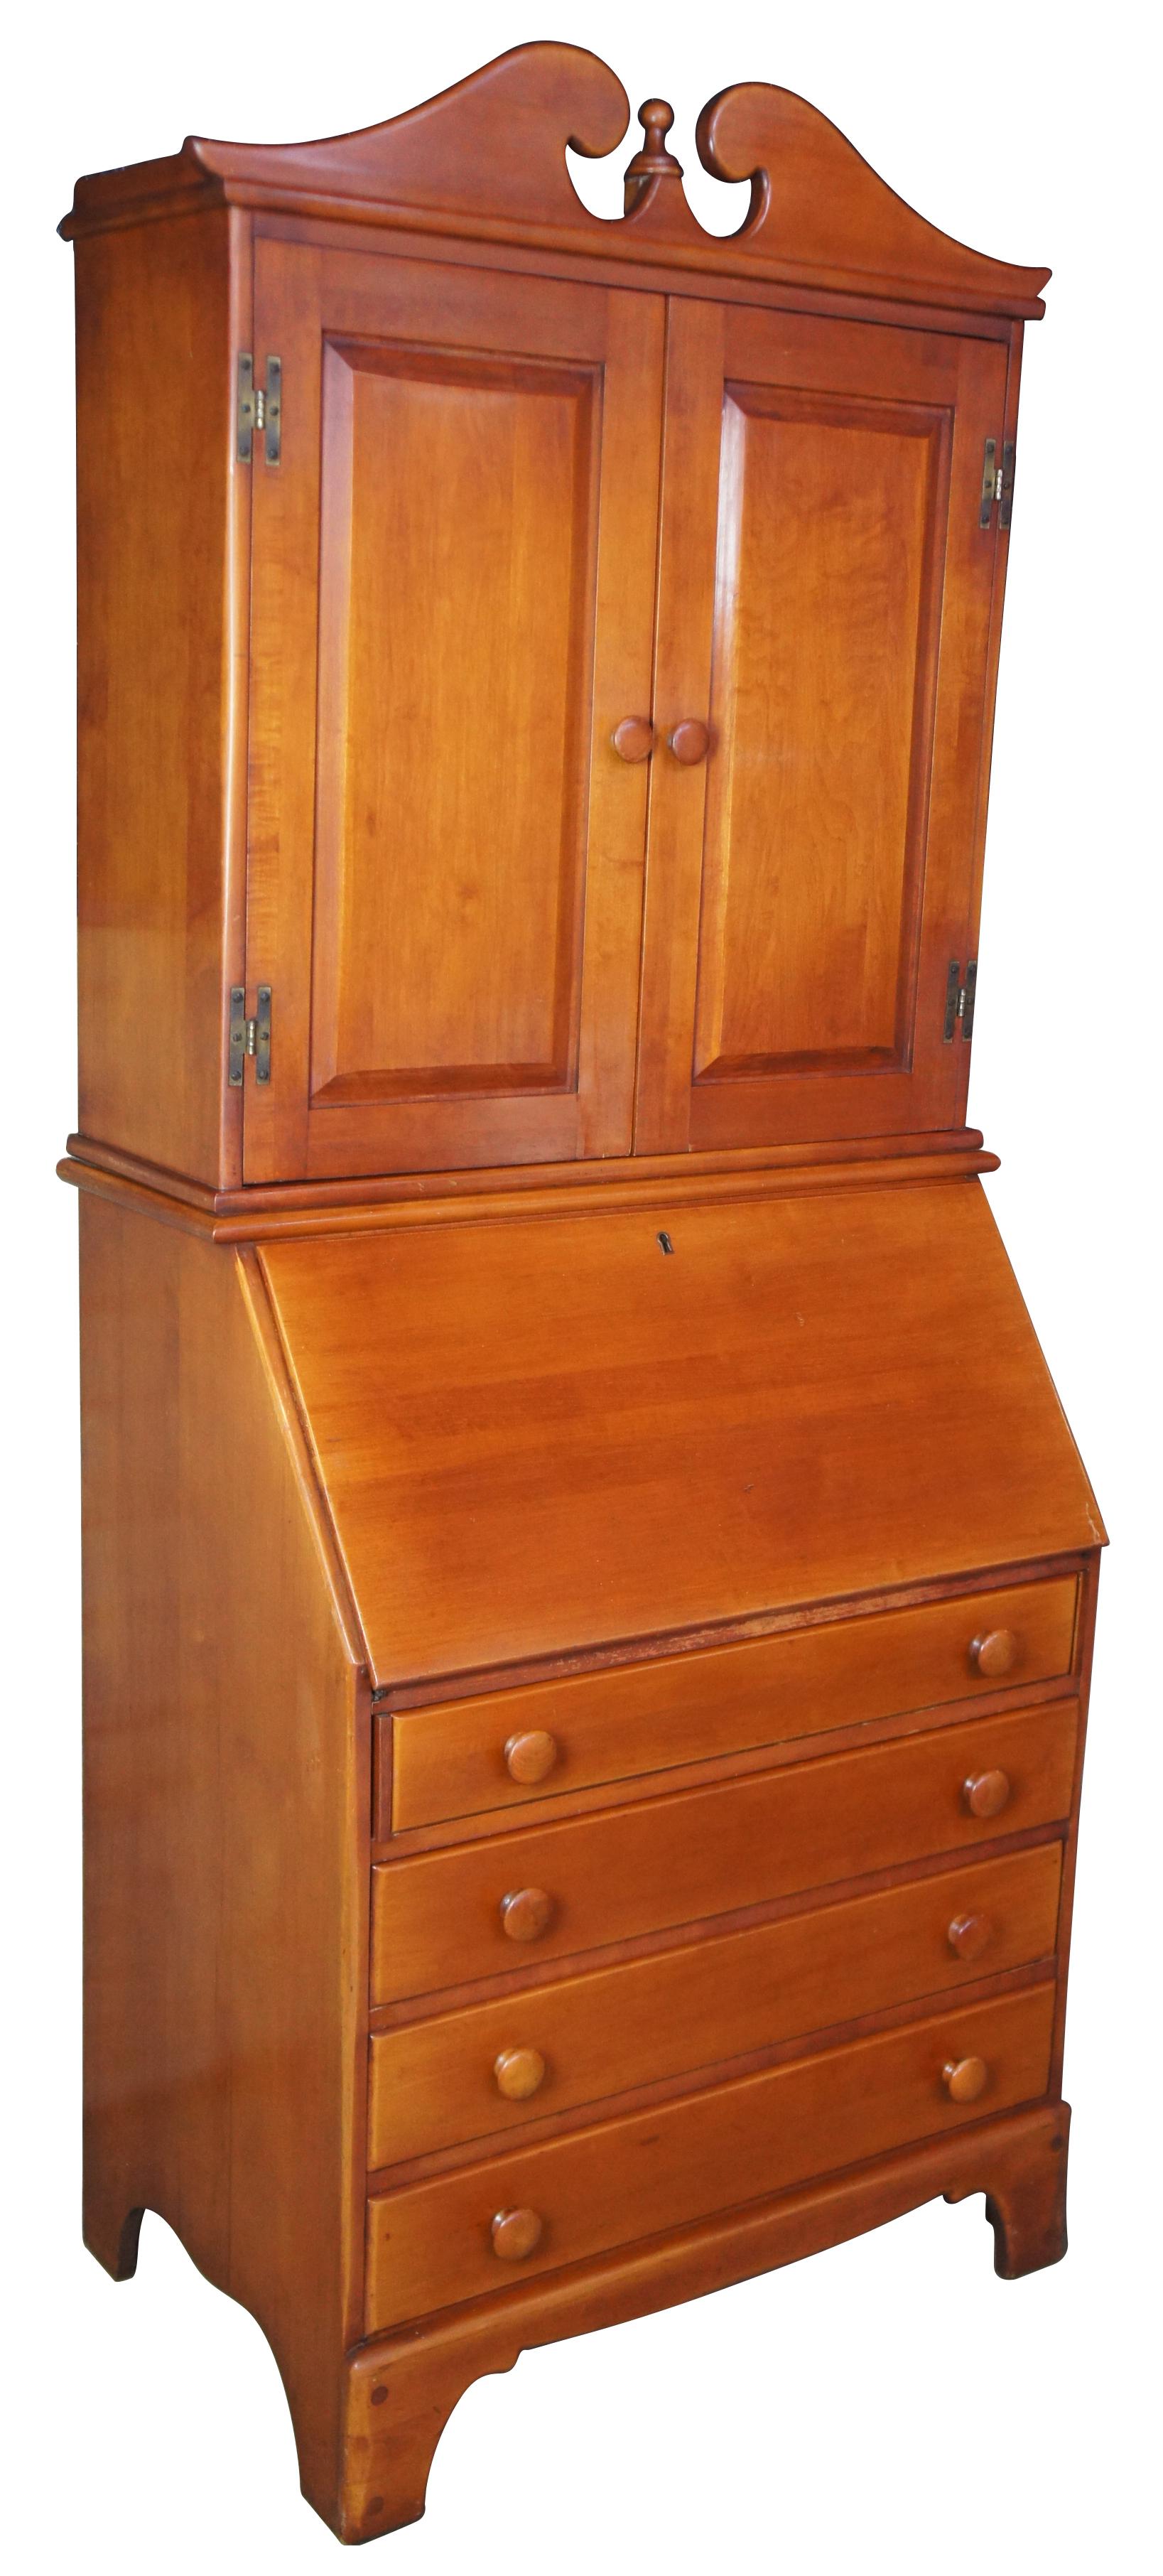 Mid-20th century secretary with bookcase by H. Willett. Part of the Golden Beryl Maple collection. Features a slant top fold out writing surface, interior compartments for storage, four drawers and upper bookcase with three shelves.
     